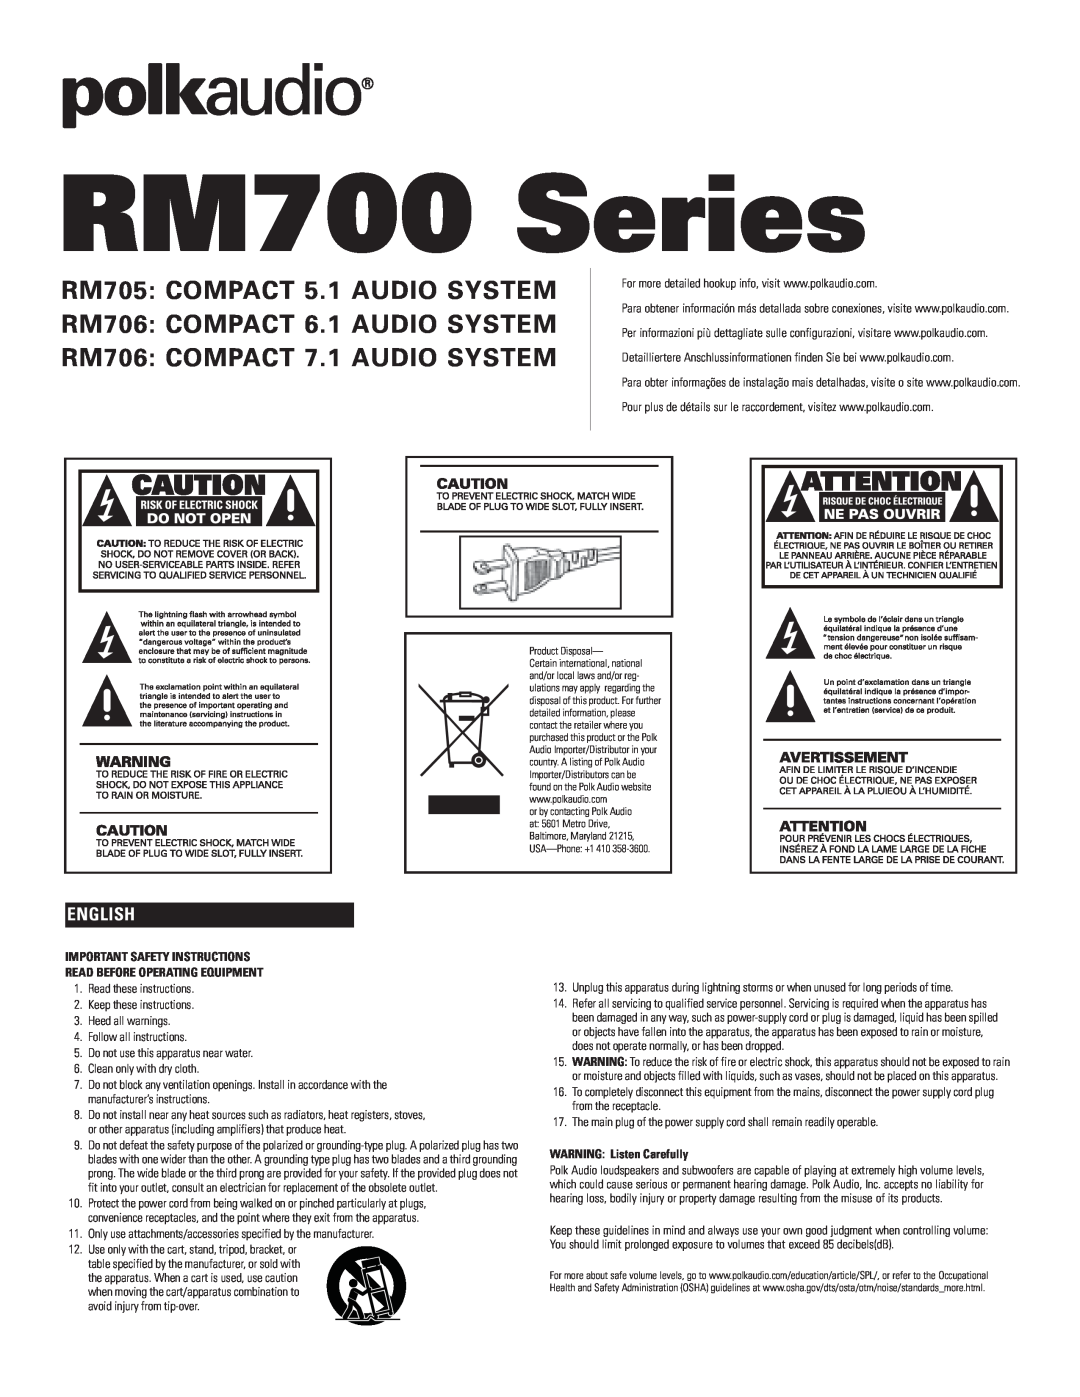 Polk Audio RM706 important safety instructions English, RM700 Series, RM705 COMPACT 5.1 AUDIO SYSTEM 